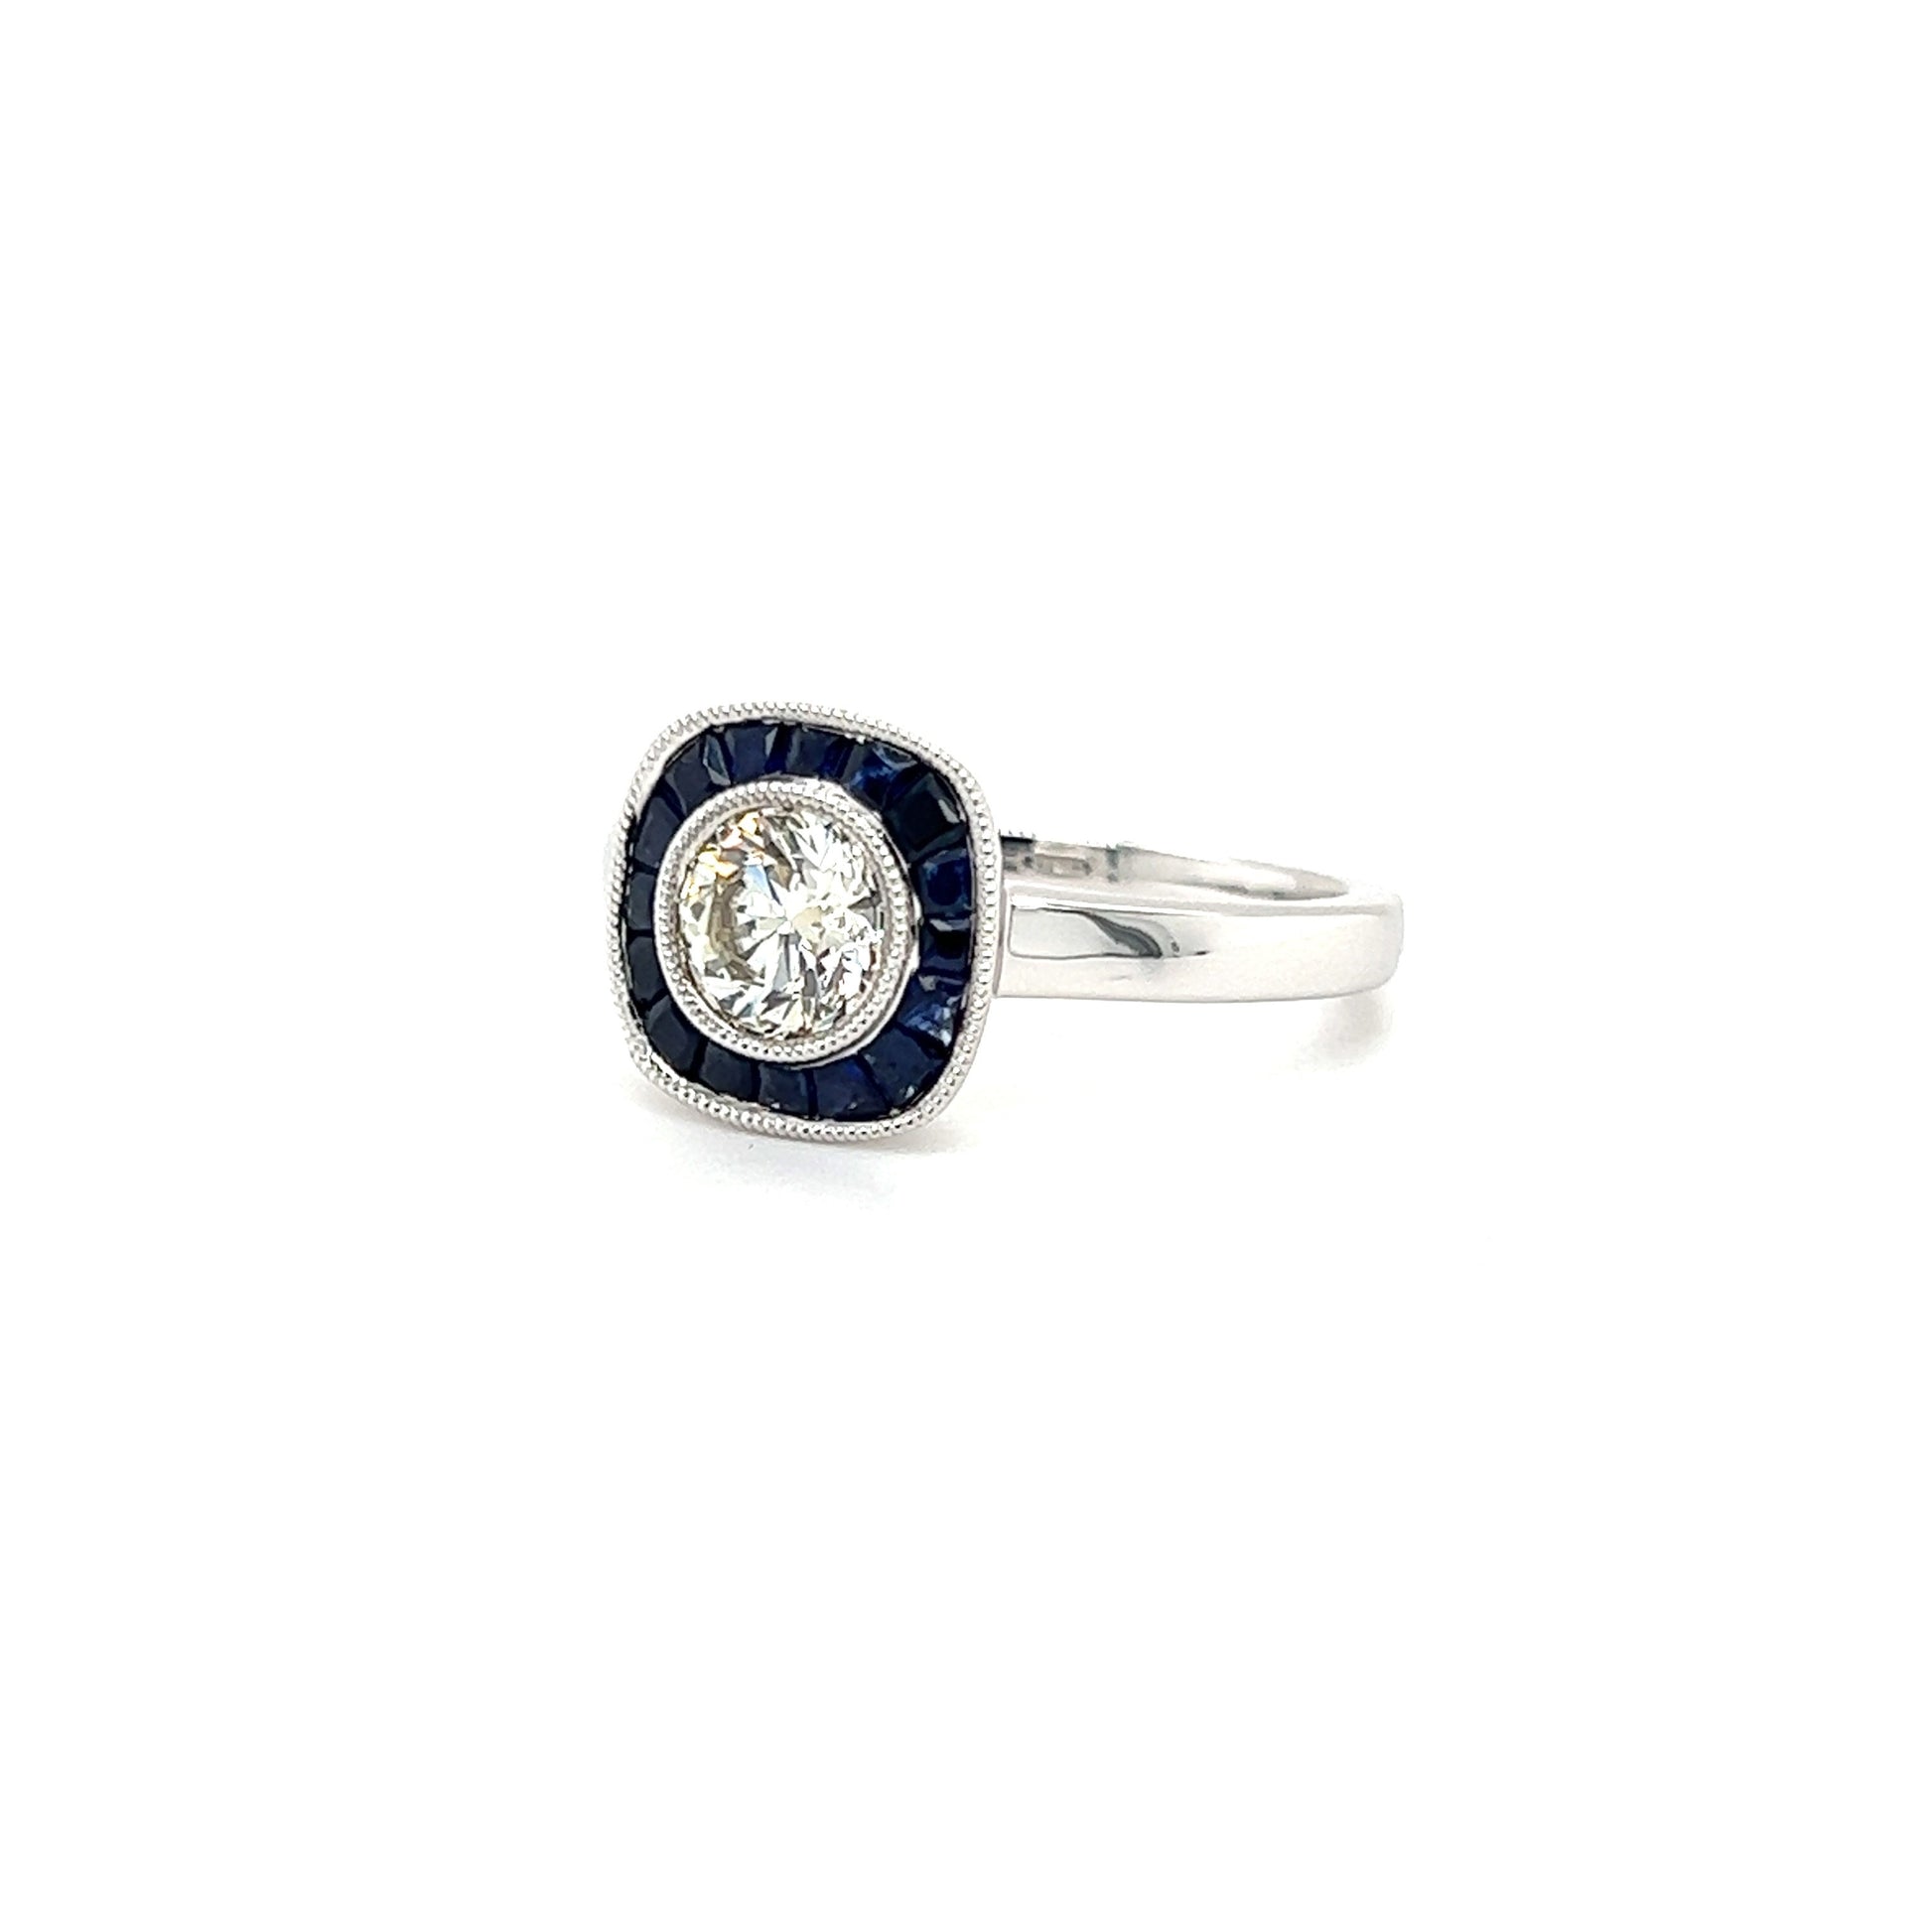 Brilliant Diamond Ring with Sapphire Halo in 18K White Gold Right Side View